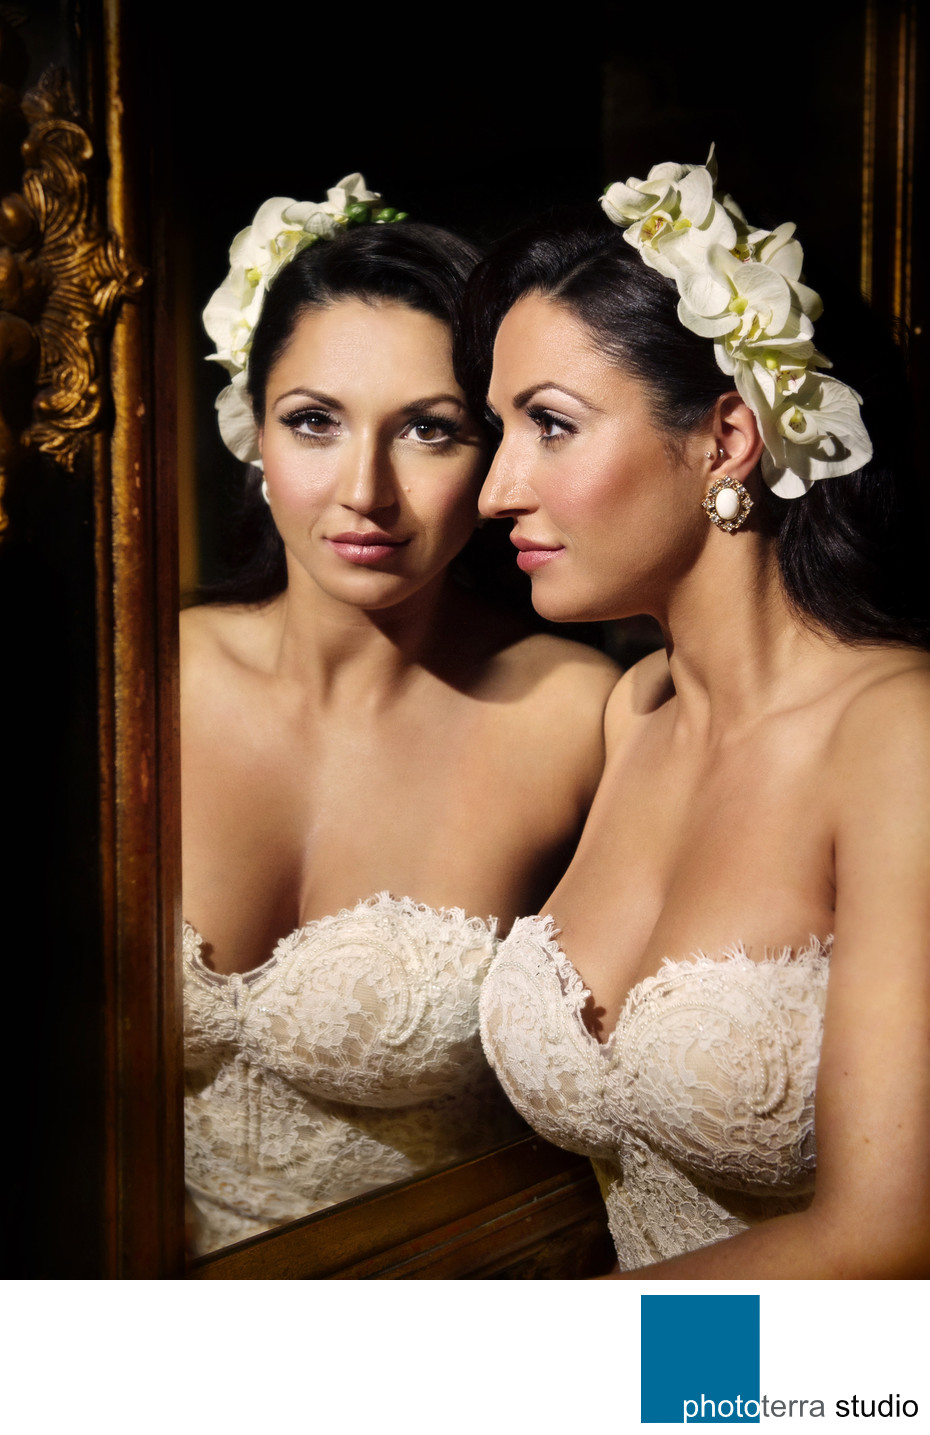 Reflection of a Bride